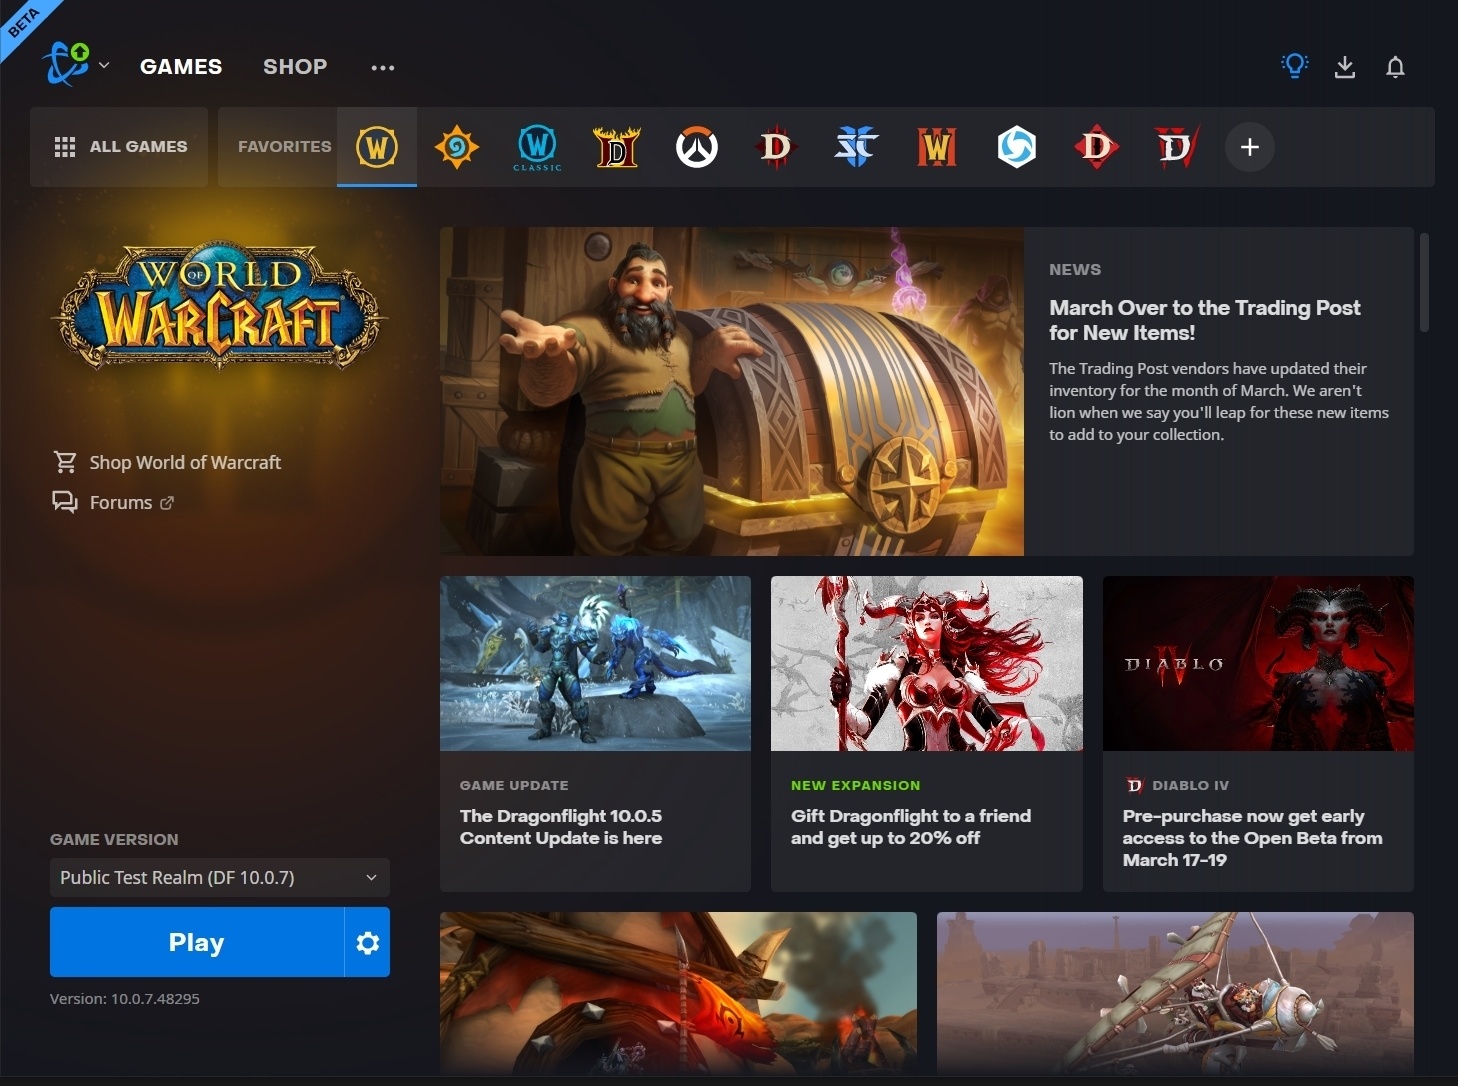 Welcome to the new Battle.net!